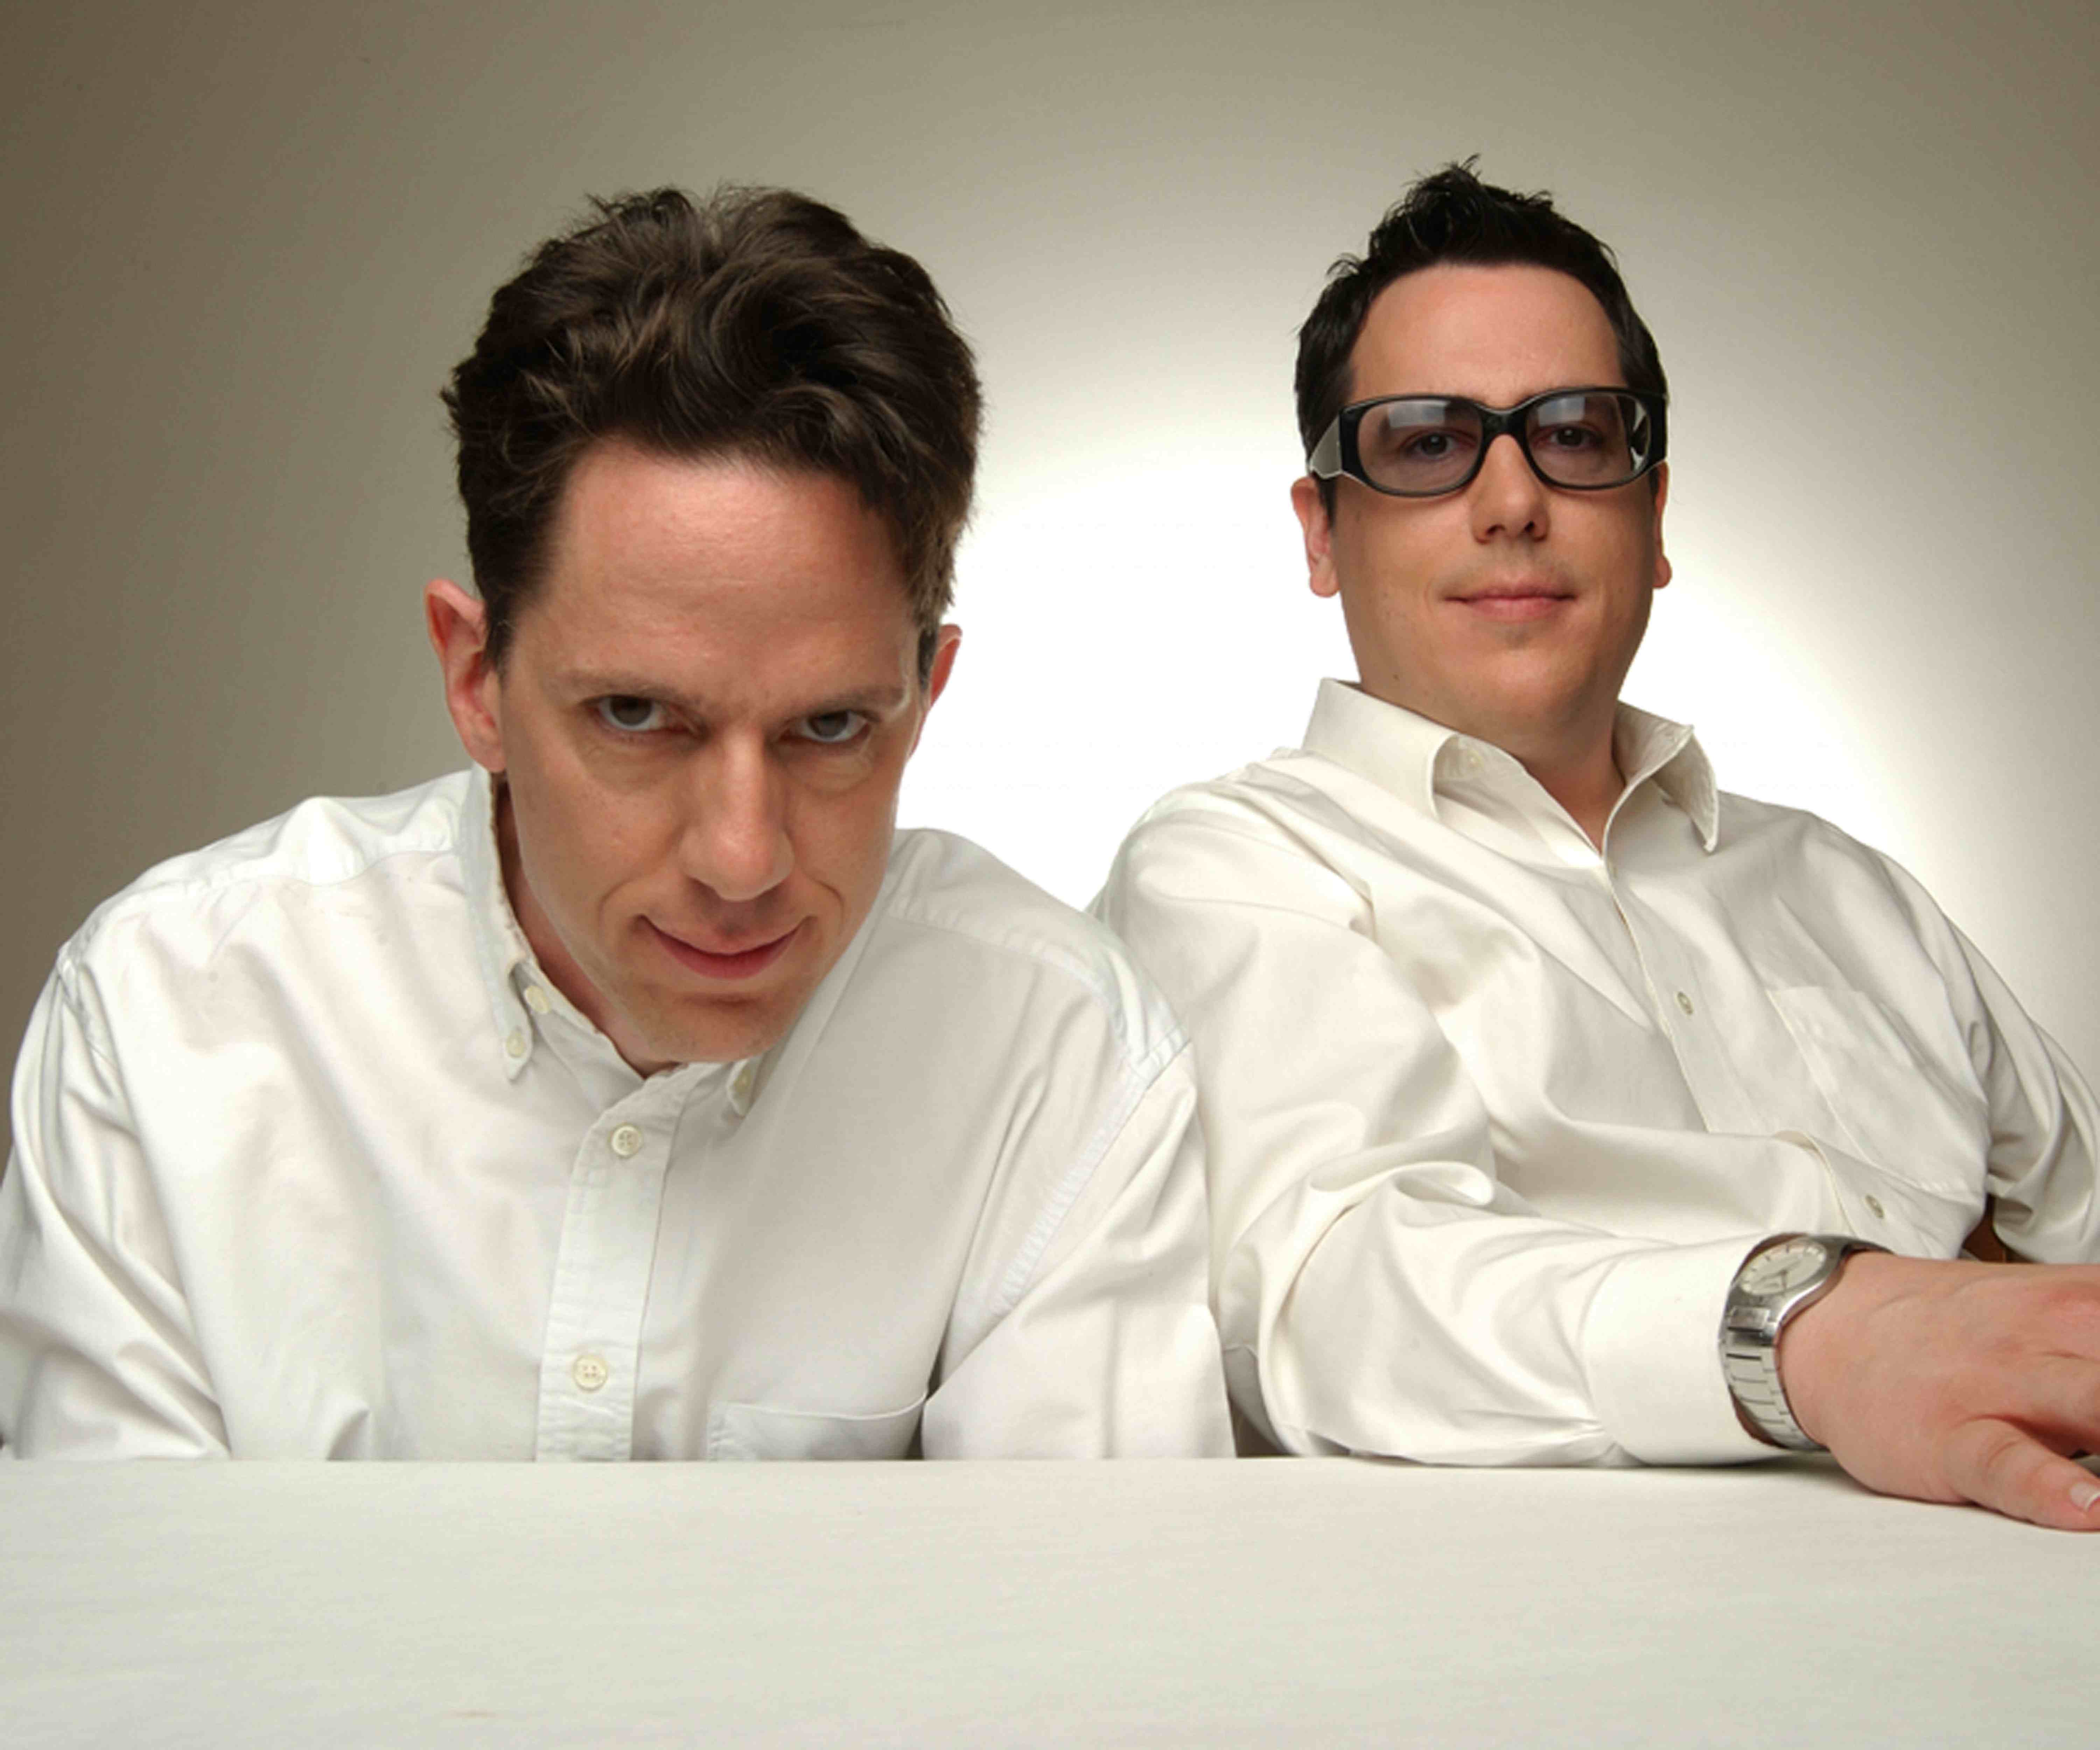 They Might Be Giants #8